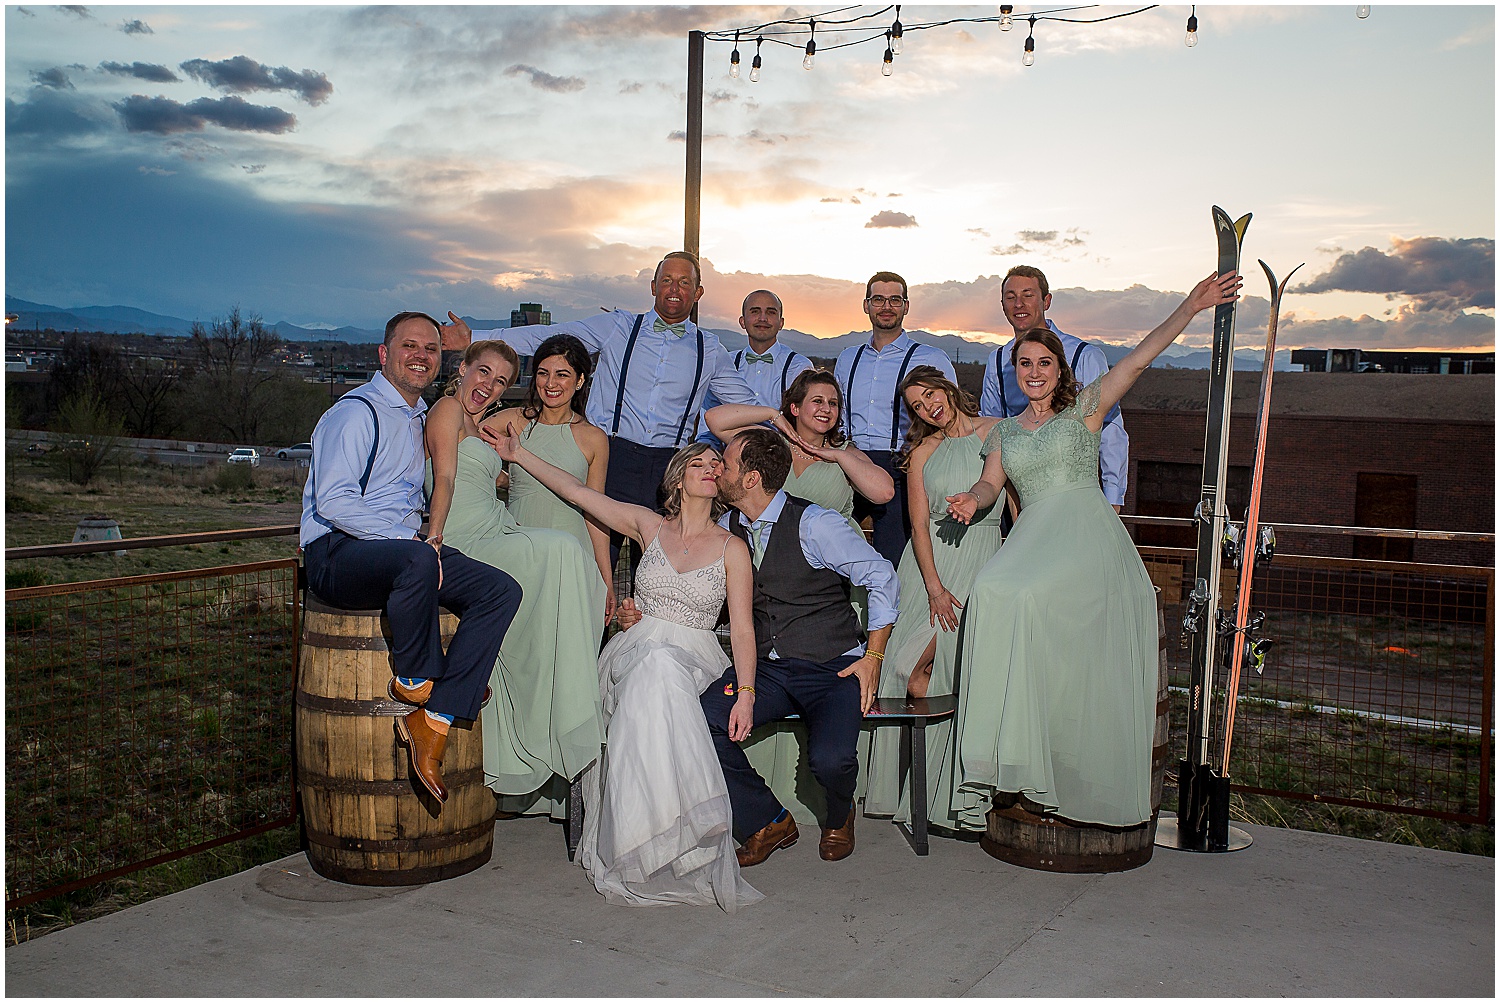 Great Divide Wedding Photos, Denver Colorado Wedding Photographer, brewery wedding, festival, festival theme wedding, getting ready, wedding dress, wedding hairstyle, bride, makeup, wedding day, wedding flowers, wedding inspiration, first look, groom, wedding couple, great divide beer, brewery wedding, colorado wedding, unique wedding theme, wedding toasts, reception, party, sunset, bridal party